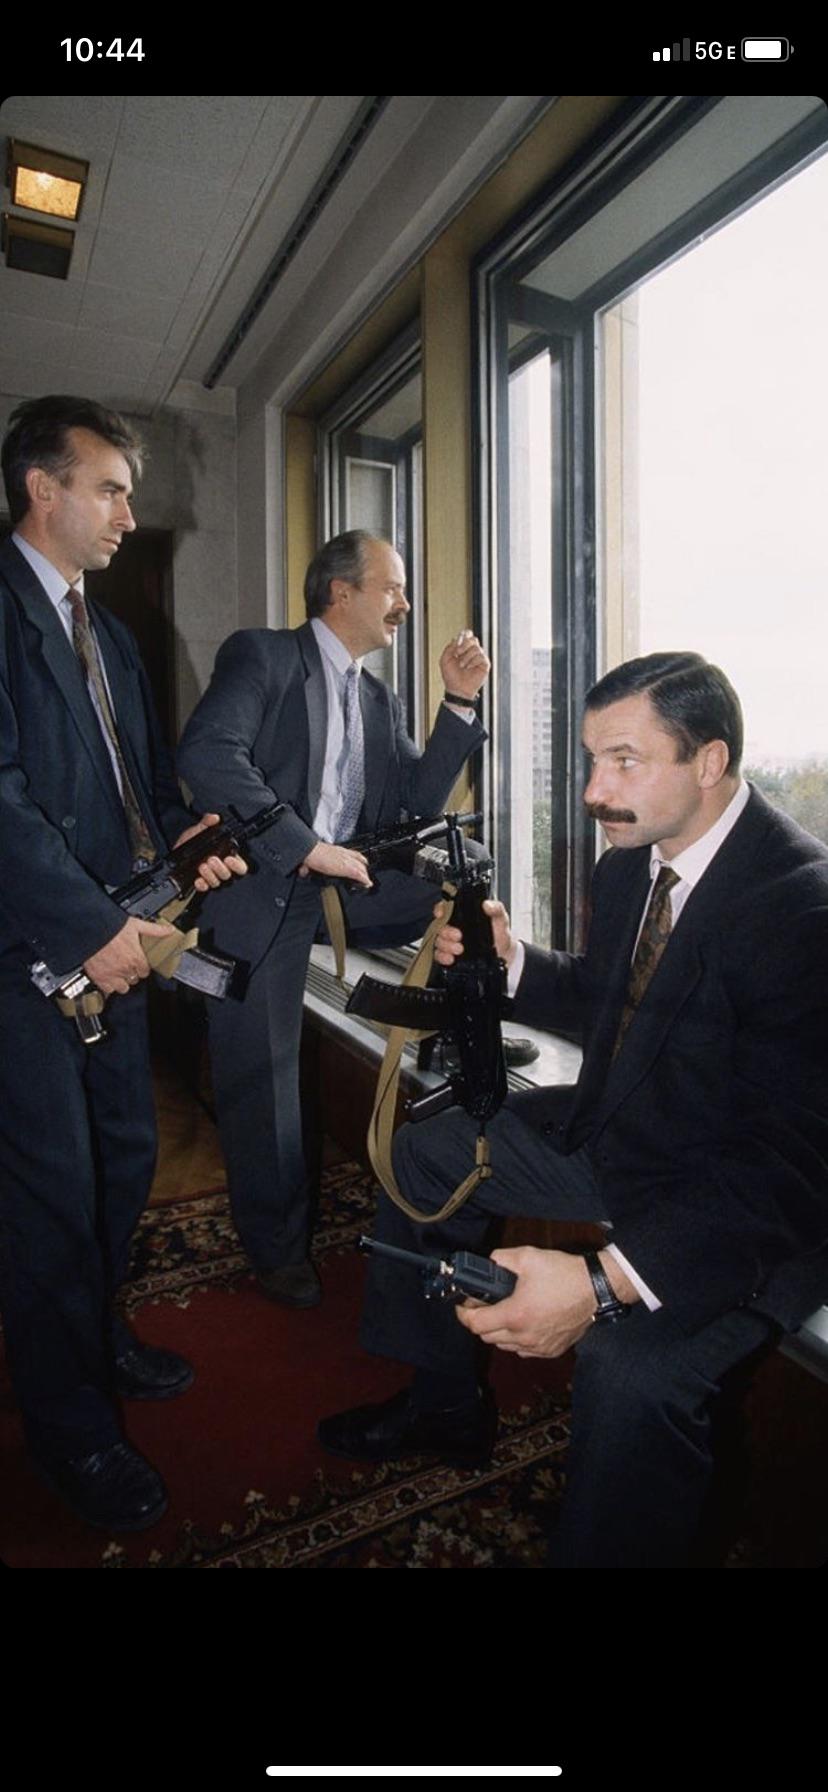 Men in suits with AK’s, sometime during the Chechen War. 1990s.jpg